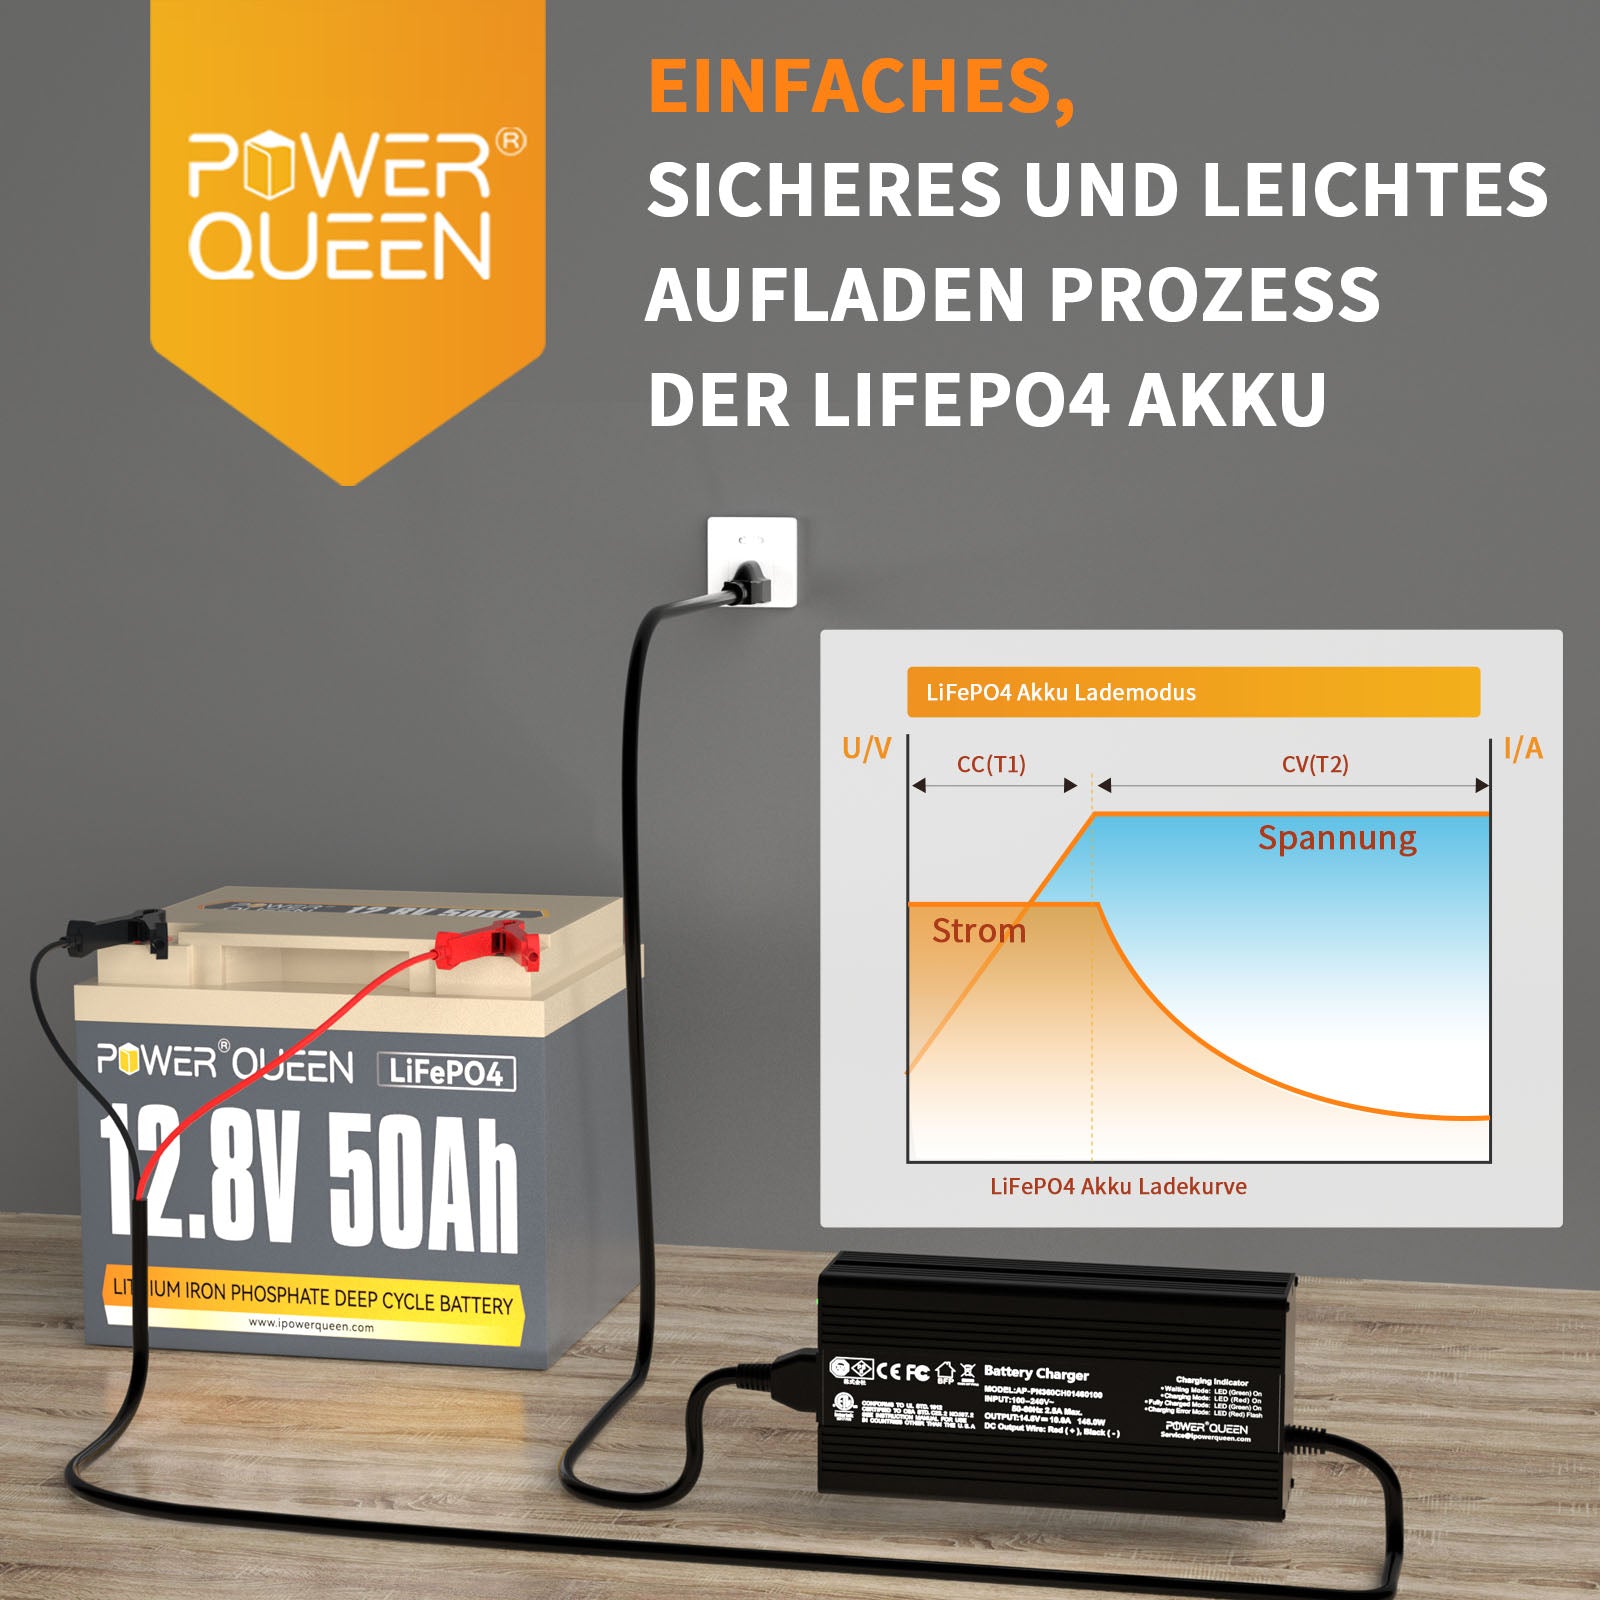 Power Queen 12,8V 50Ah LiFePO4 accu met 14,6V 10A LiFePO4 lader